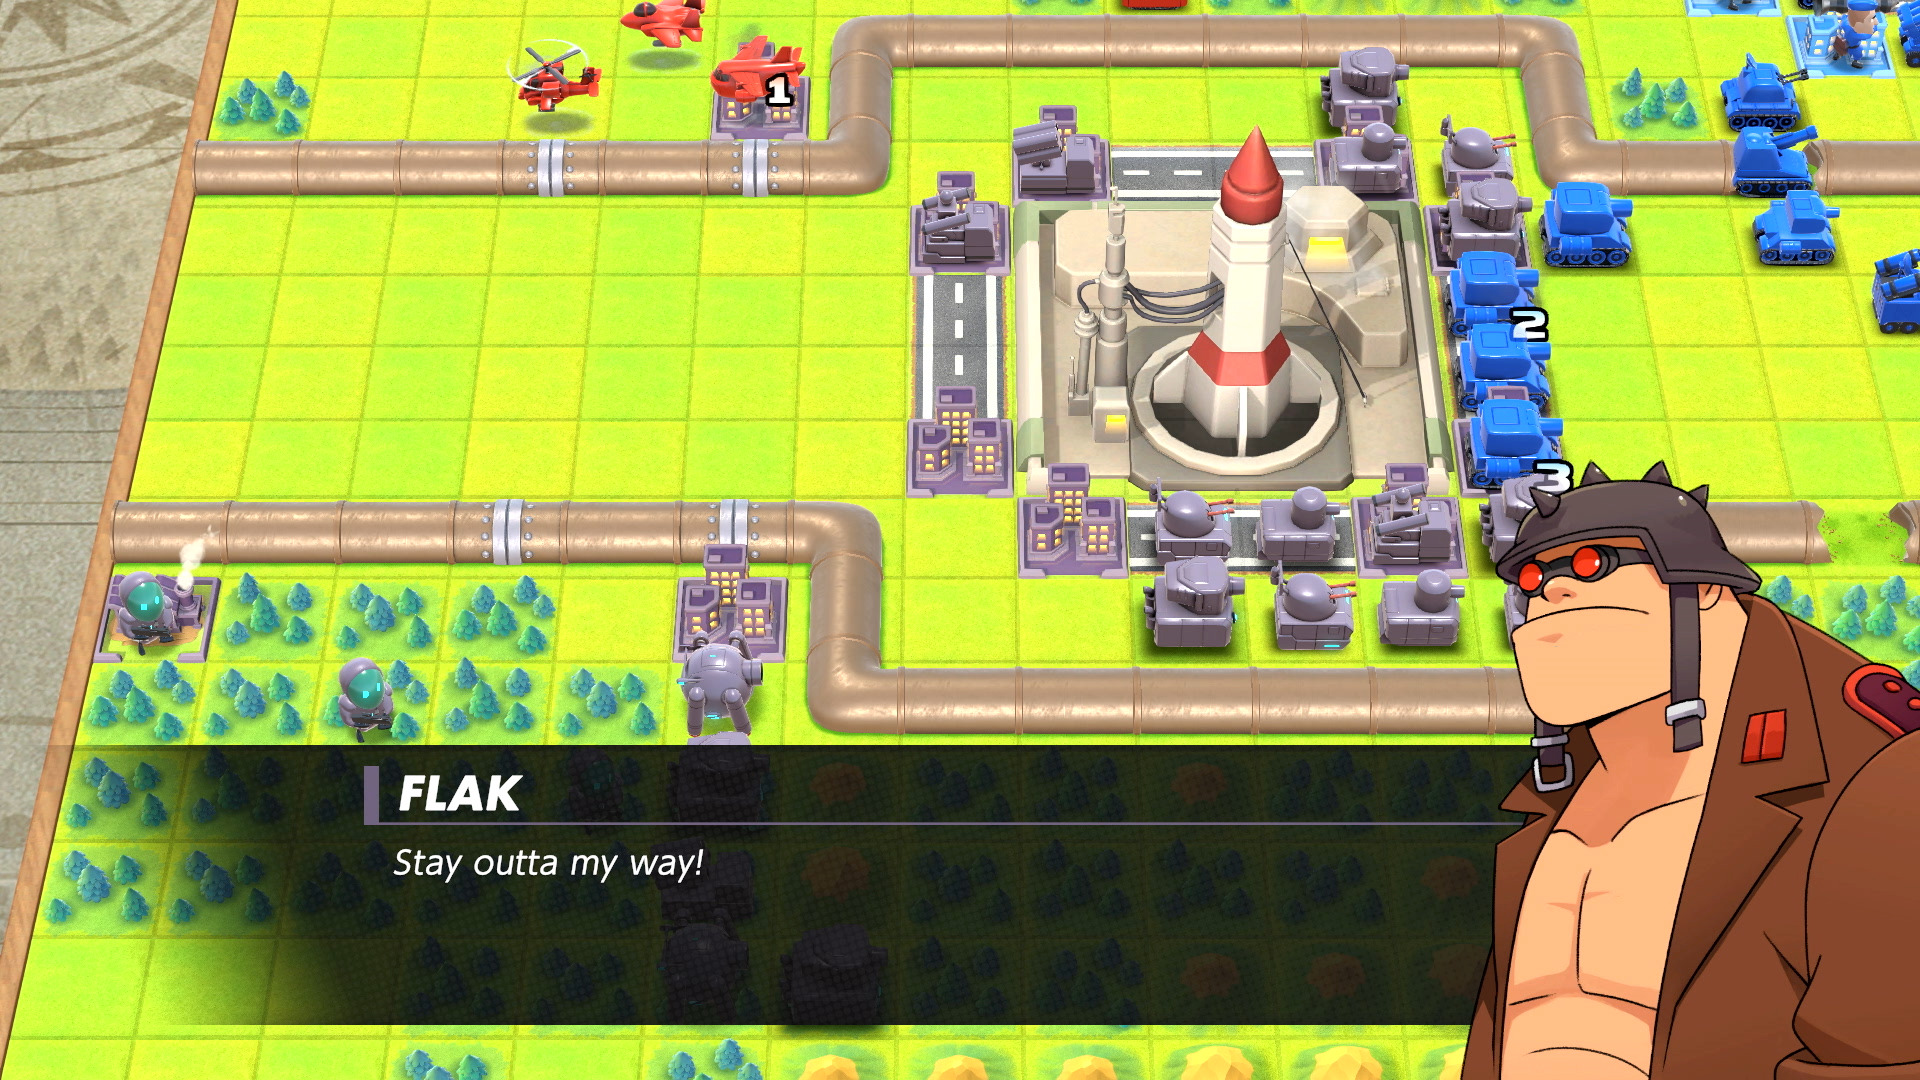 Advance Wars 1+2: Re-Boot Camp Release Date